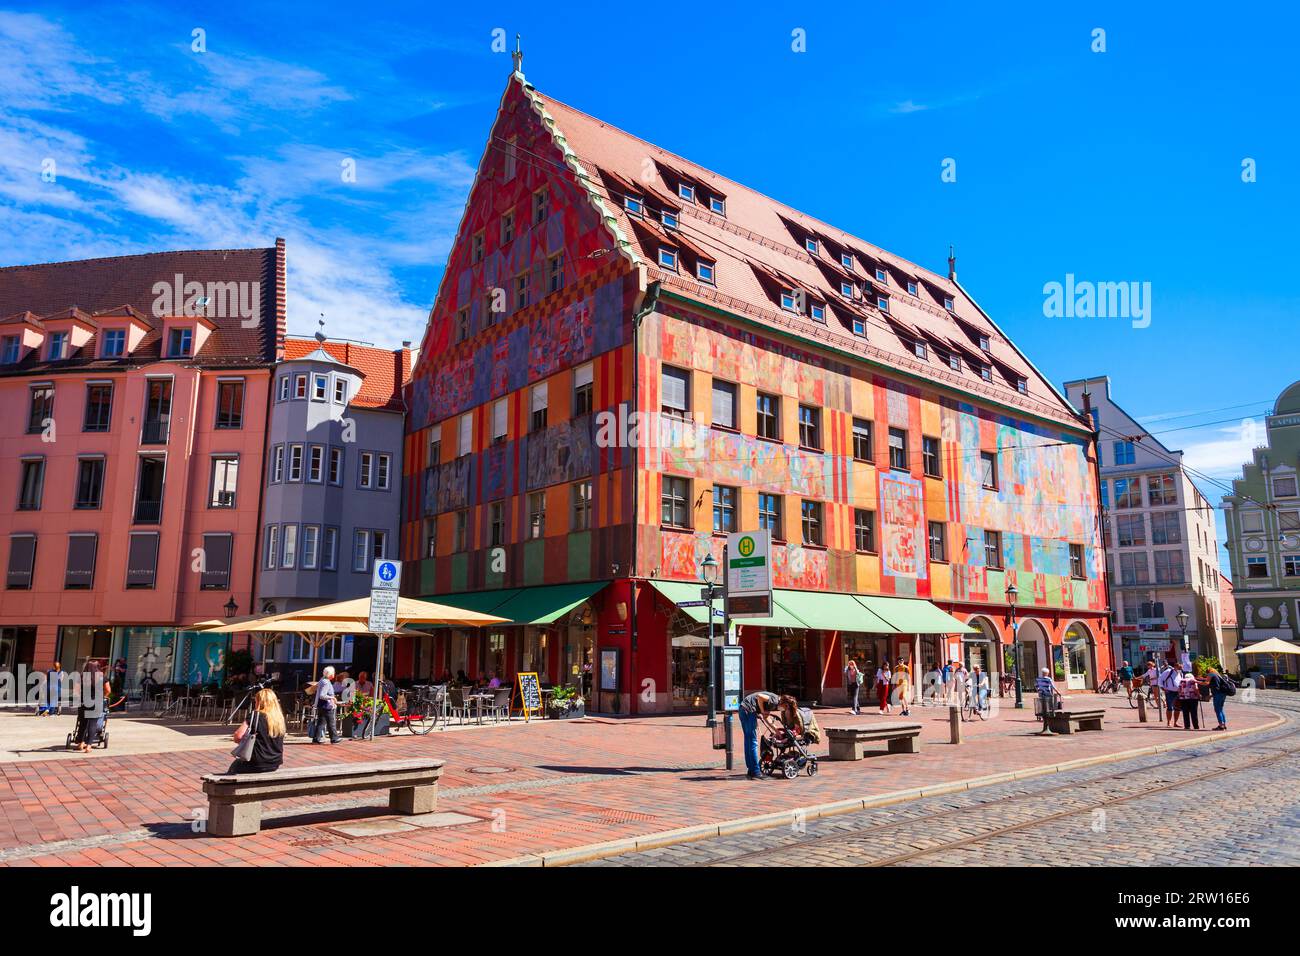 Augsburg, Germany - July 06, 2021: The Weberhaus is the former guild house of the weavers in Augsburg. Weberhaus is located in the city center at Mori Stock Photo